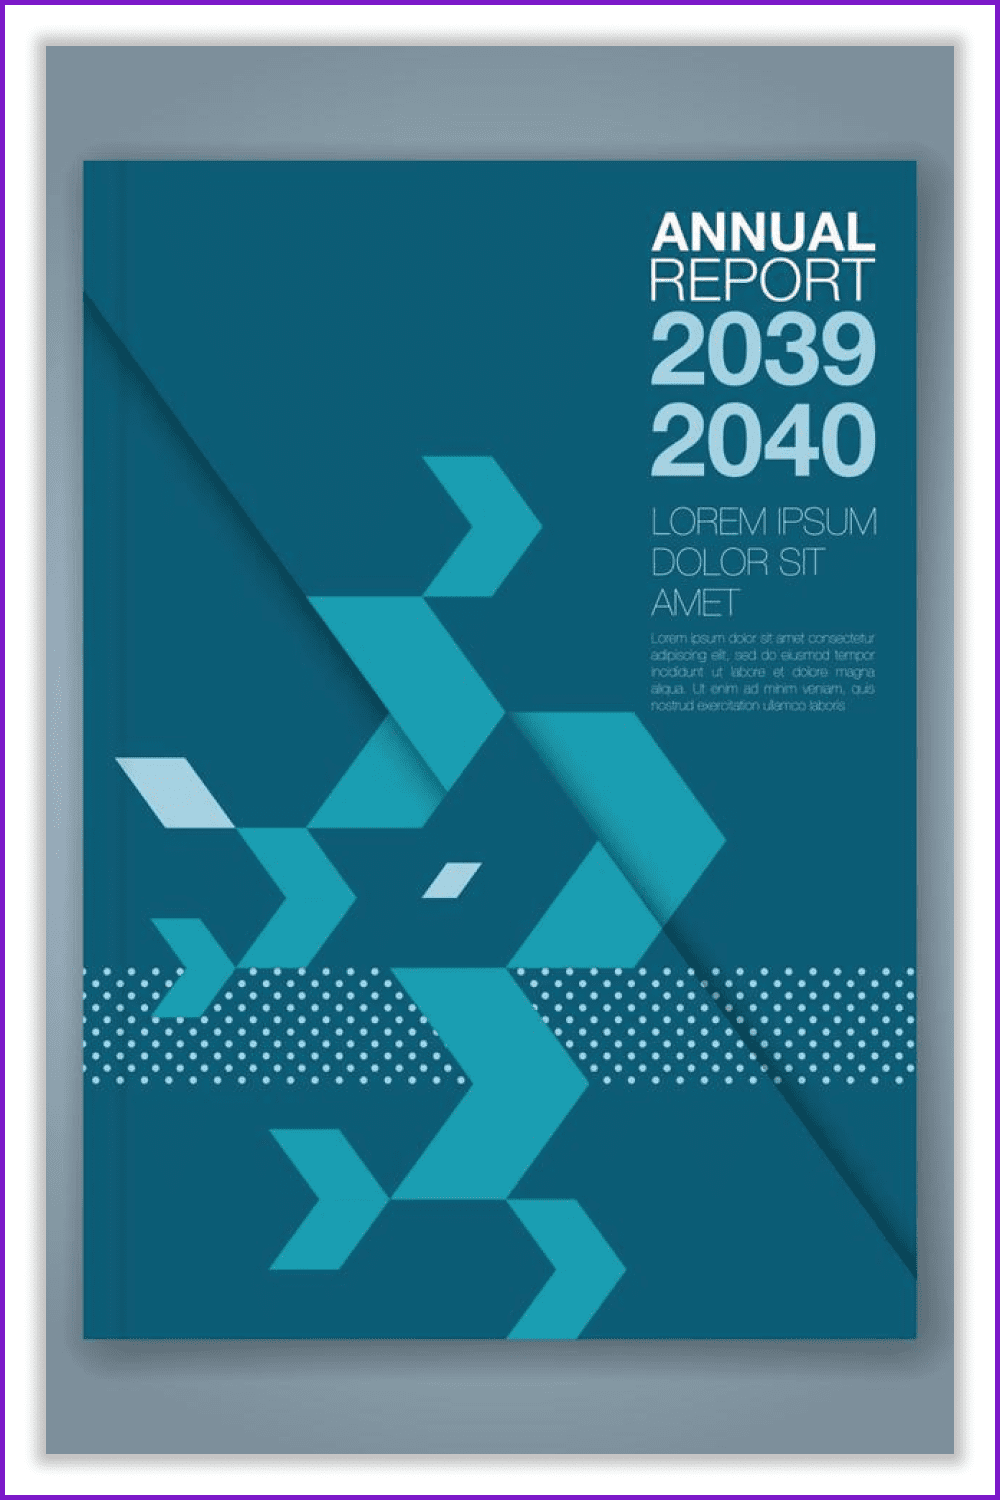 Cover of Annual report with blue background and geometric shapes.